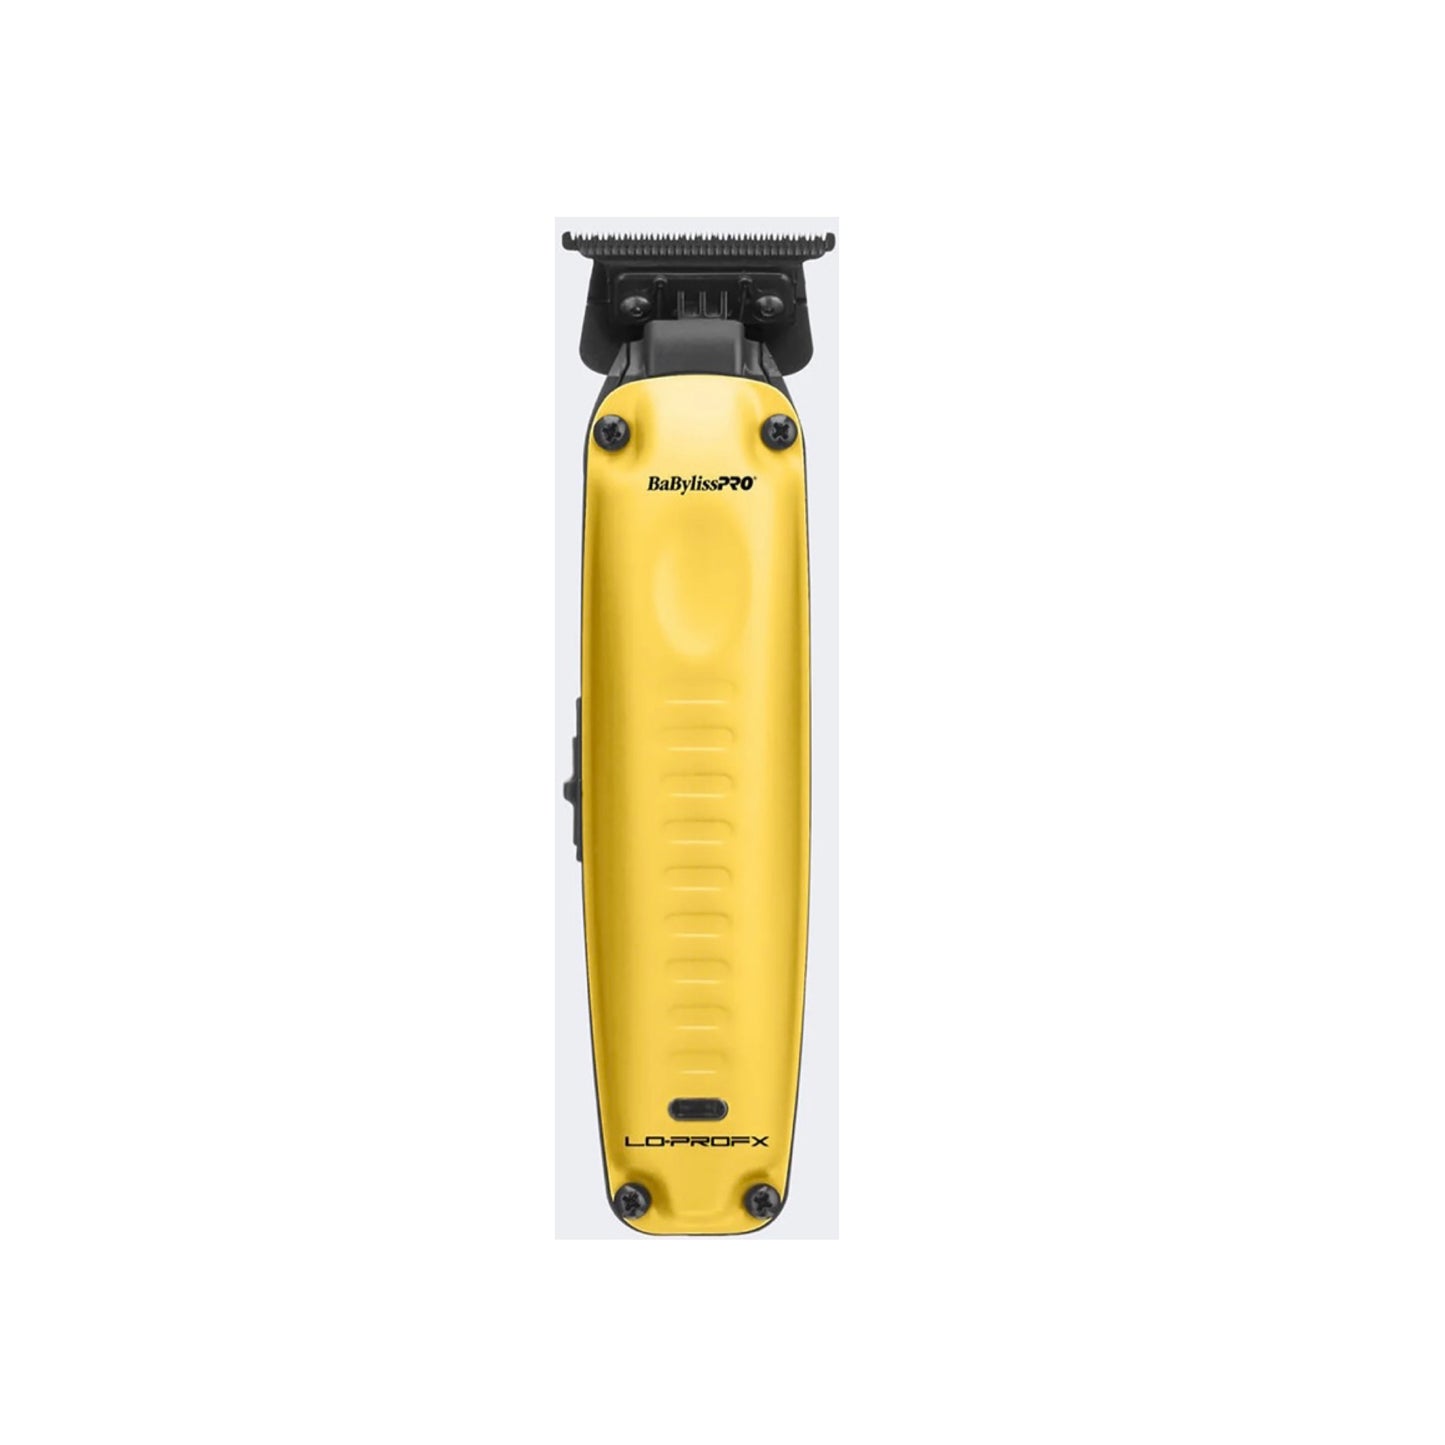 Babyliss Lo-Pro FX Influencer Trimmer - Andy Authentic